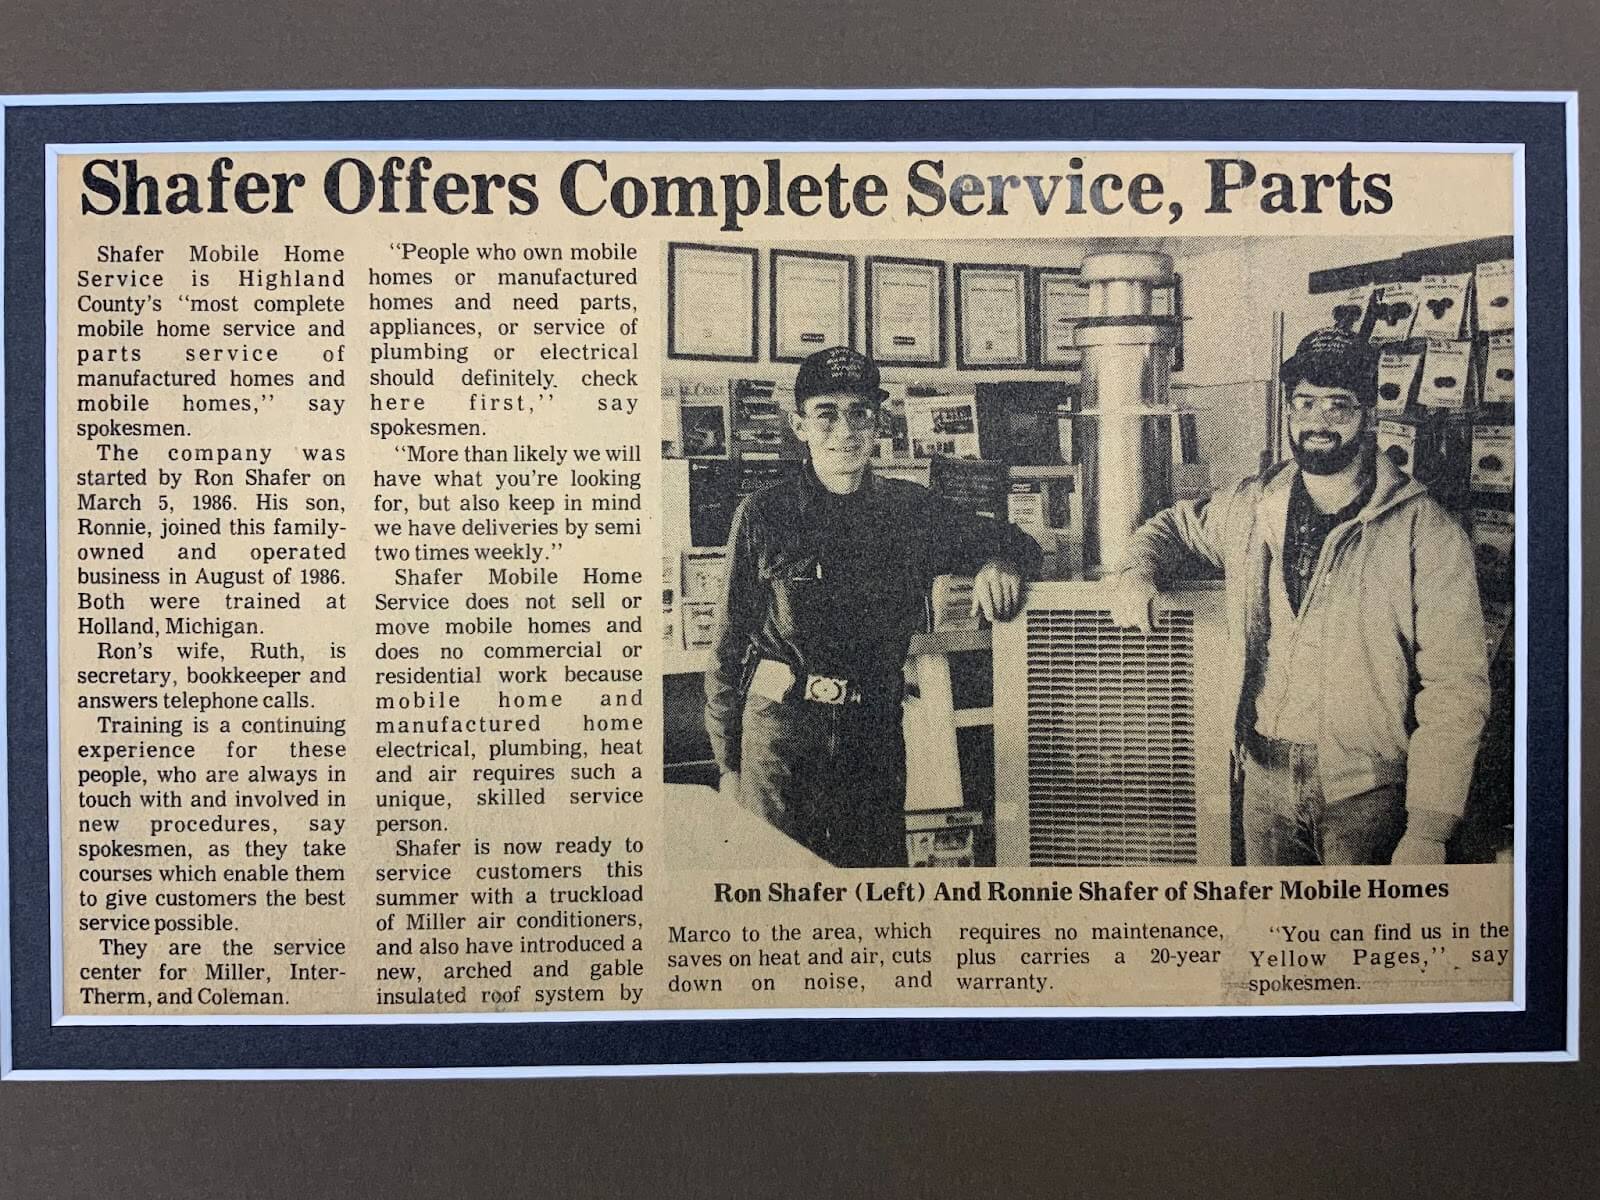 Old newspaper clipping about Shafer Mobile Home Service